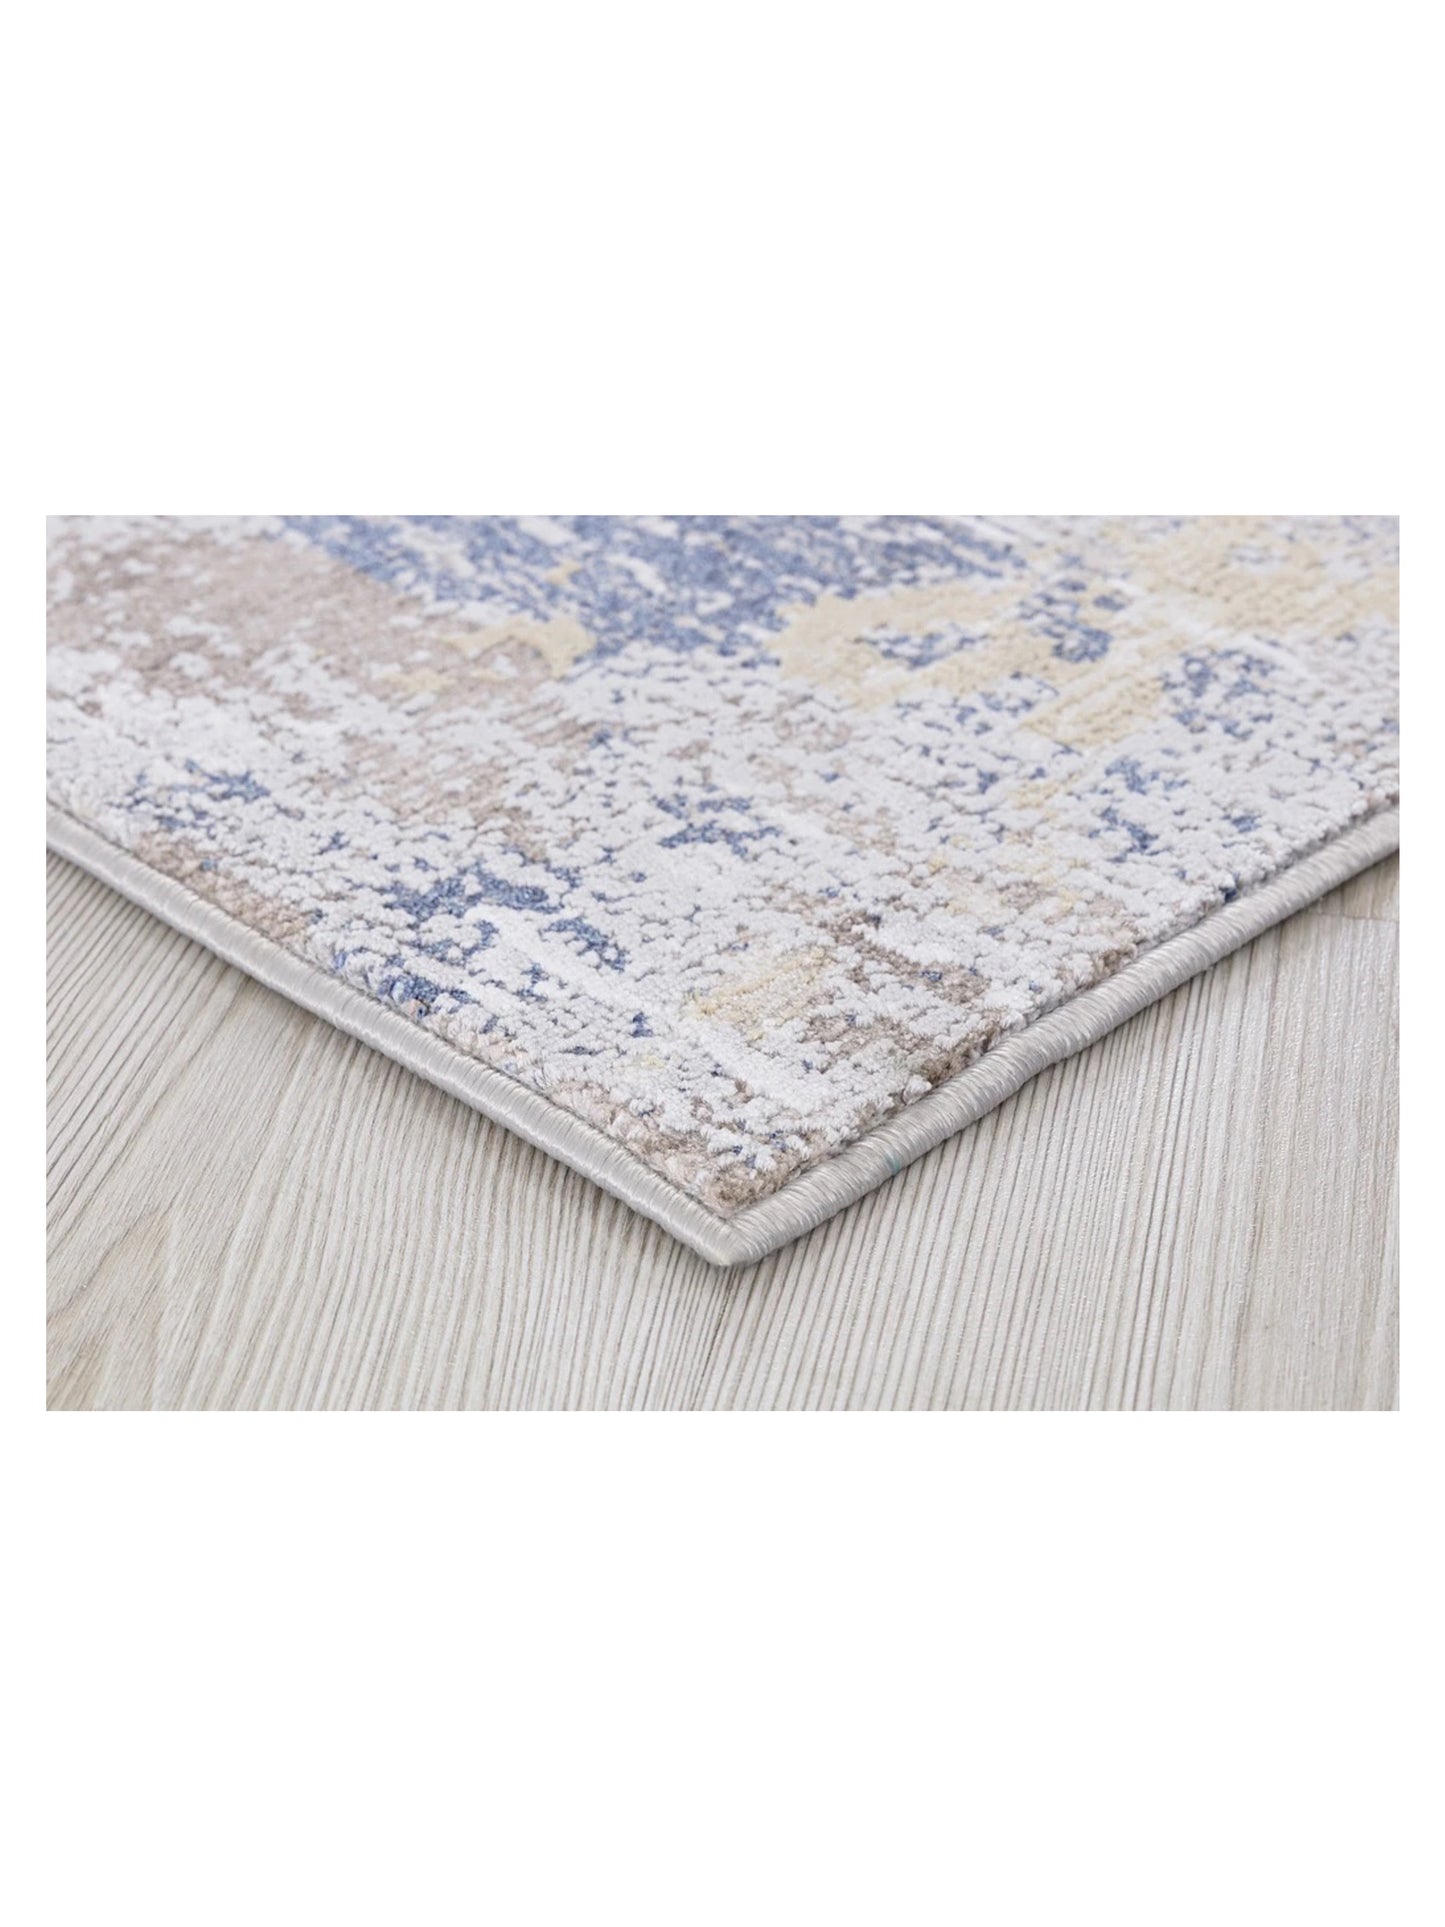 Limited Courteney CY-253 GOLD  Transitional Machinemade Rug